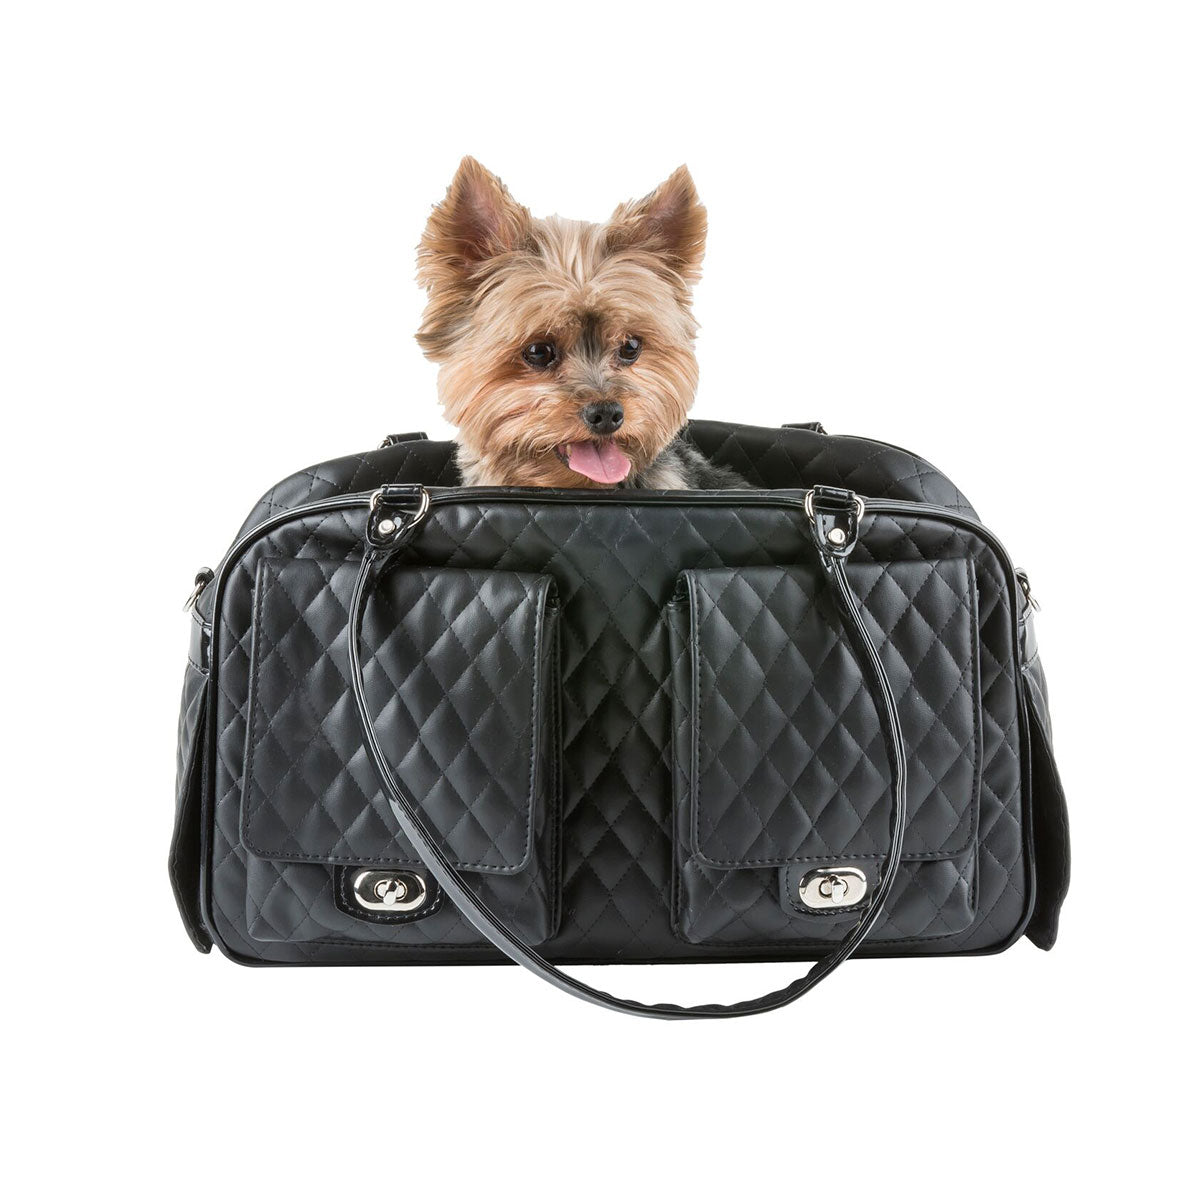 Luxury Puppy Purse Vegan Leather Luggage Dog Pet Carriers - Model Paws